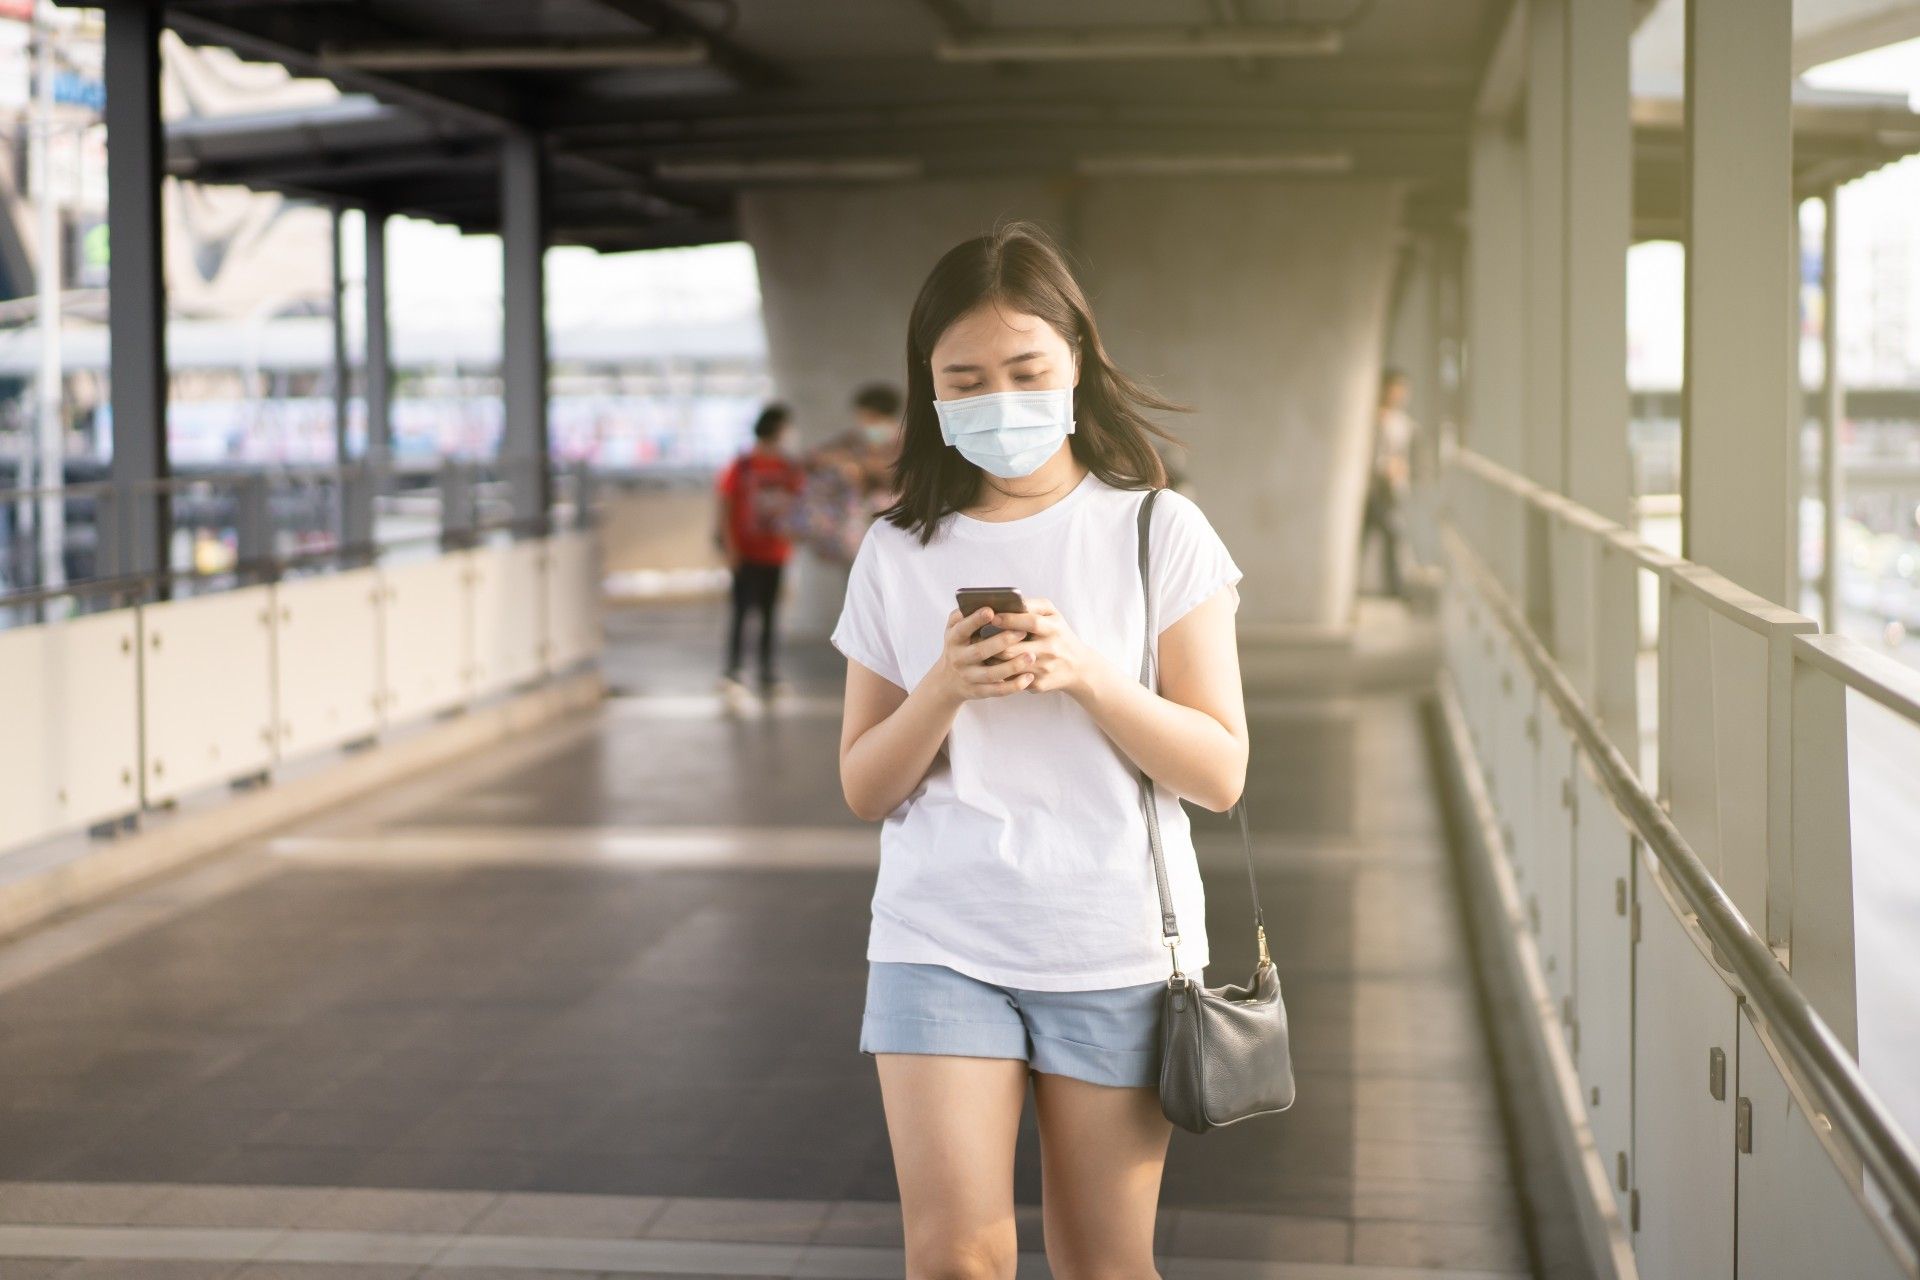 A woman walks while wearing a mask and looking at her smartphone - test and trace app